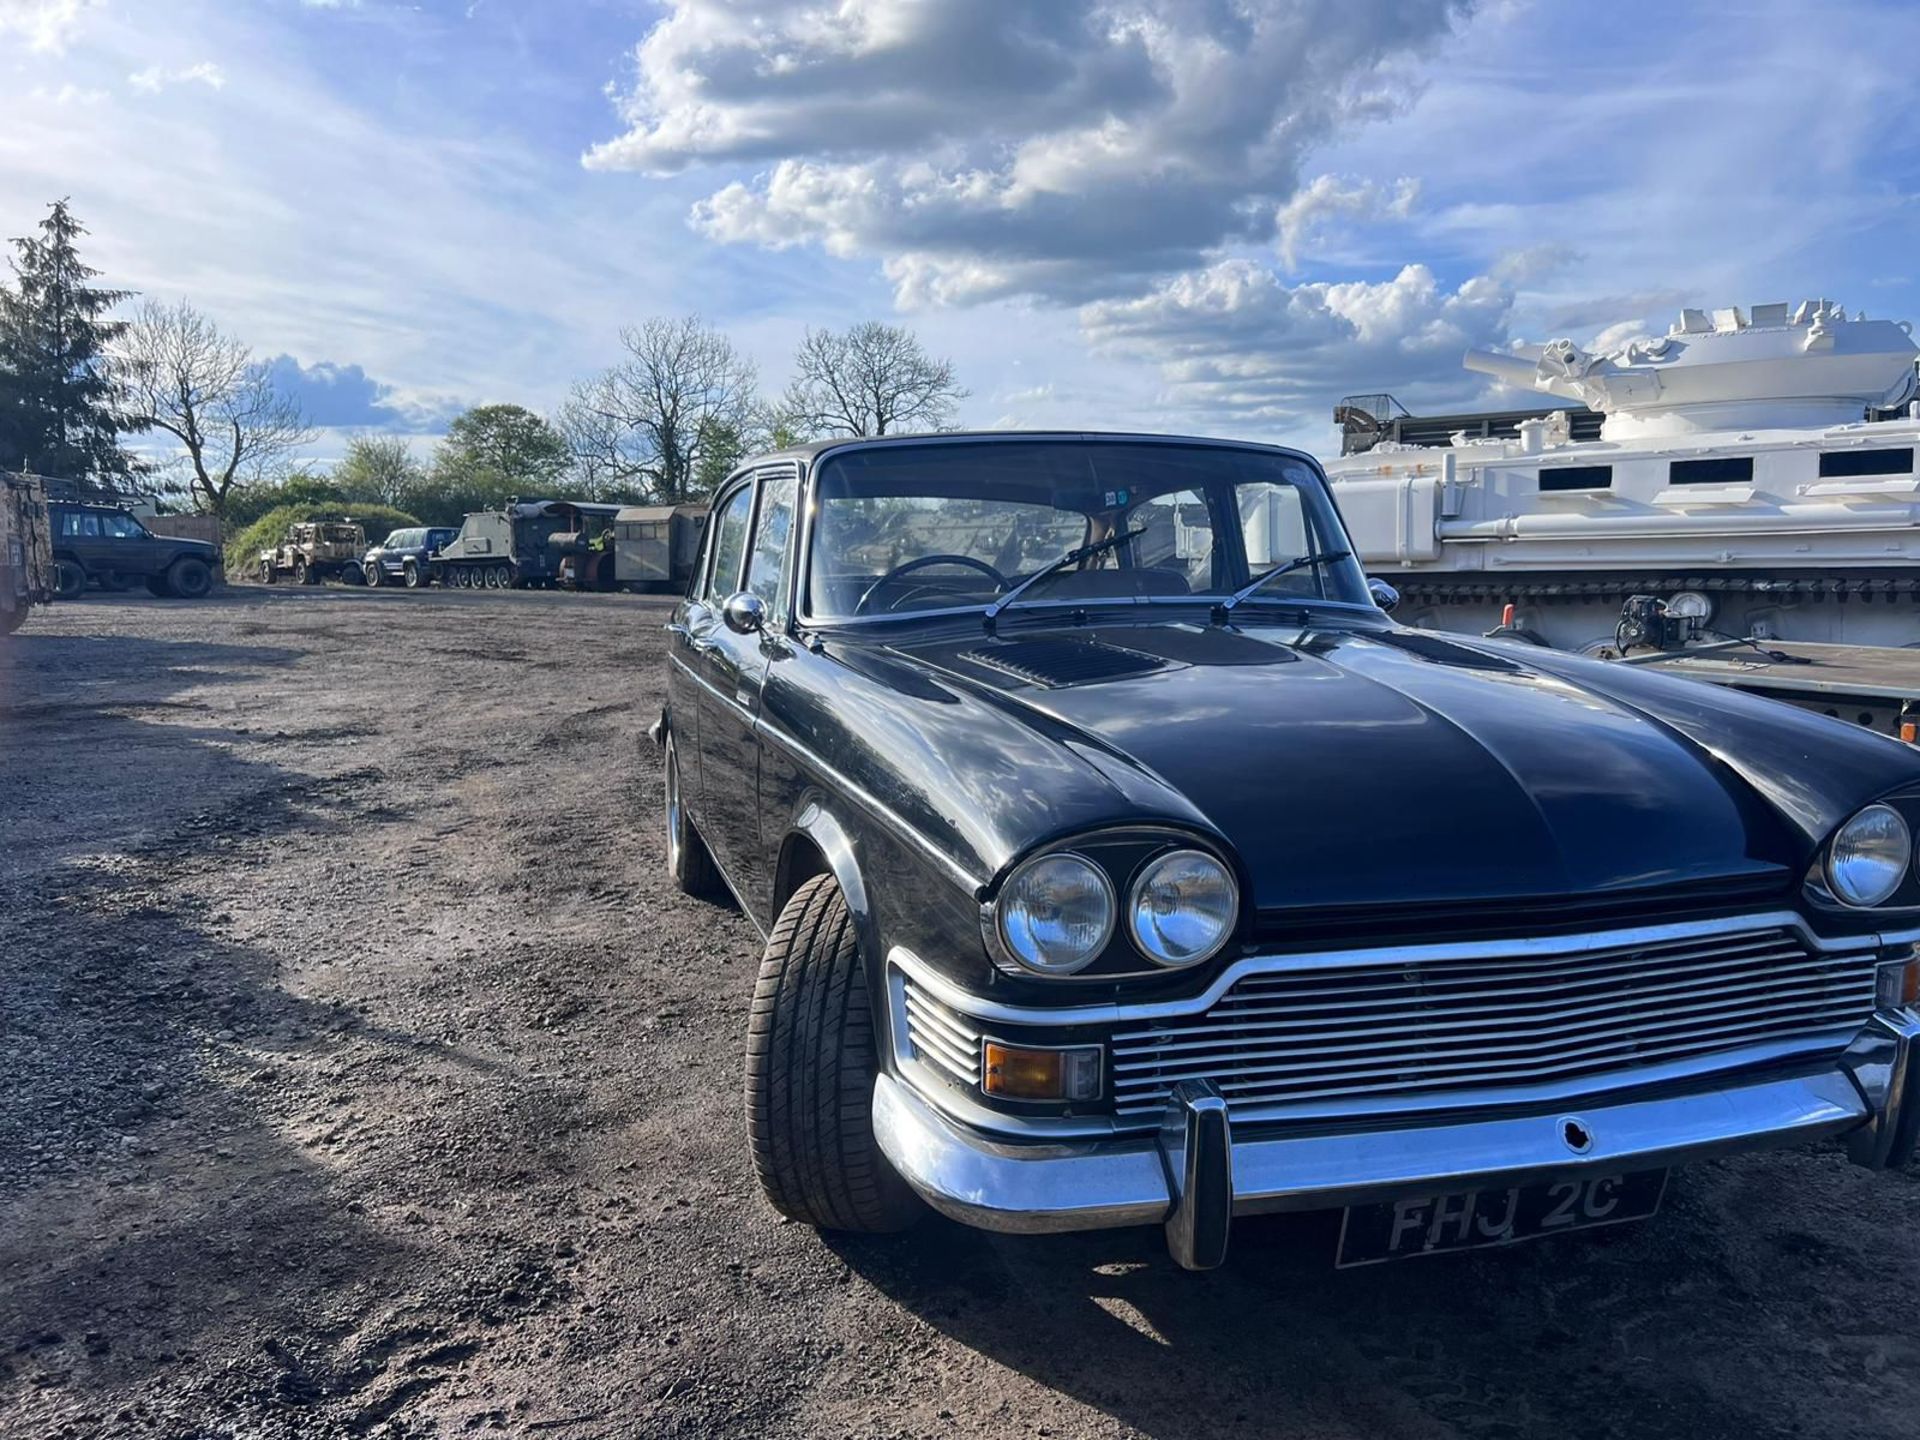 1965 Humber Imperial with a 6.75L Rolls Royce Shadow engine and gearbox - Image 2 of 24